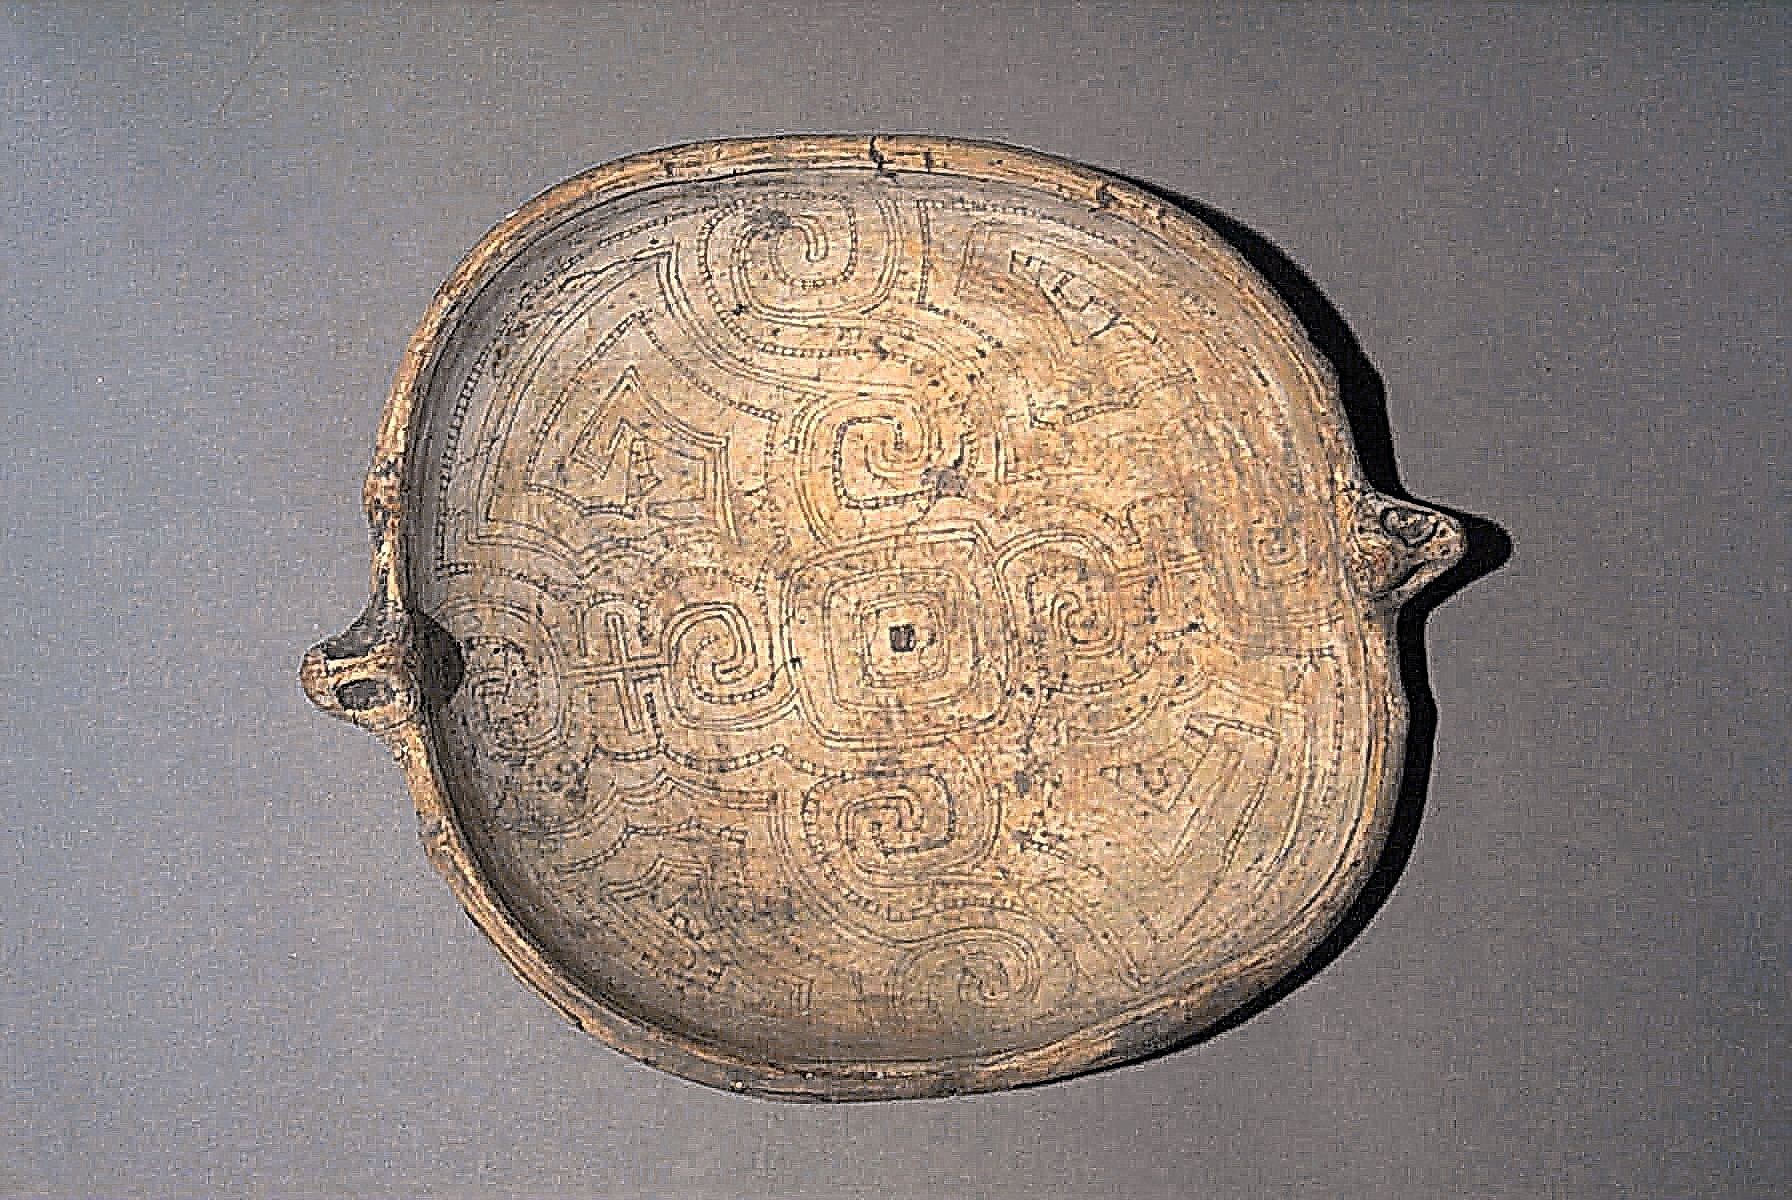 Brazil, Marajo Plate with incised geometric design and zoomorphic handles
Ceramic dish used for ceremonial offerings is decorated in buff color slip over incised geometric curvilinear designs on the interior and underside of the rim which is embellished by two zoomorphic adorno handles. The overall shape suggests a possible interpretation of a turtle, an animal  motif that appears frequently in Marajo ceramics. The fineline incised geometric pattern that decorates the interior begins with a central theme of a square within the square which is surrounded by S-shaped scrolls, hooks and cruciform designs.  These types of geometric motifs which occur exclusively on ceremonial vessels designate this as a very special dish.  A combination of fine and wide incised geometric lines decorate the outer portion of the rim.  The underside is plain orange-wear. The painted incised interior, a hold-over from earlier phases is consistent with the design work from early Taino ceramics of the Carribean.  One example illustrating similar geometric design and incising technique can be seen in"O Museu Paraense Emilio Goeldi", Banco Safra, 1986, p. 133
Media: Ceramic
Dimensions: Length: 13" x Width: 10 1/4"
$9,500
99203